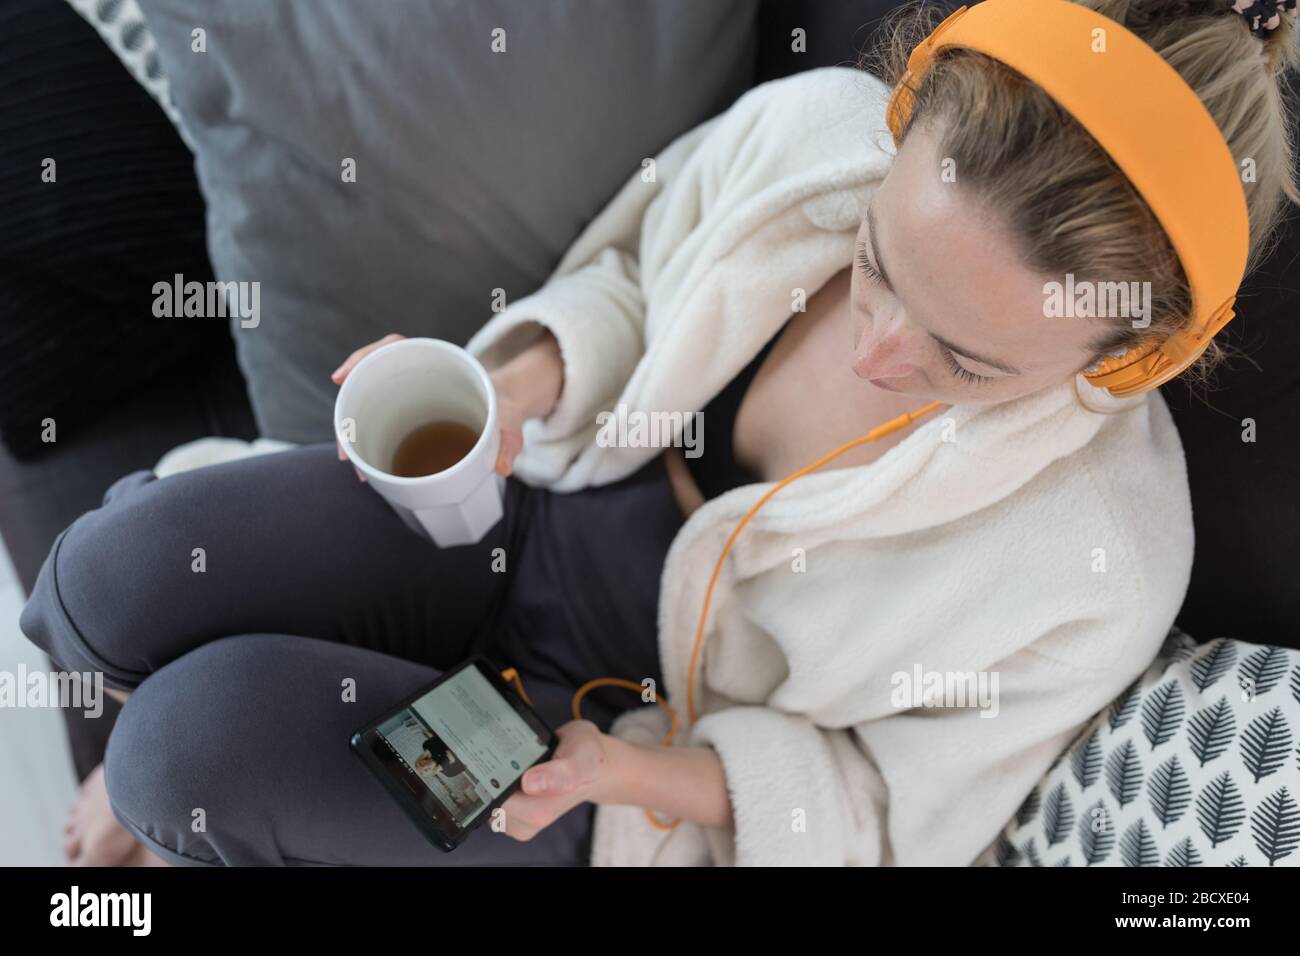 Stay at home. Social distancing. Woman at home relaxing on sofa couch drinking tea from white cup, listening to relaxing music, stay connected to Stock Photo